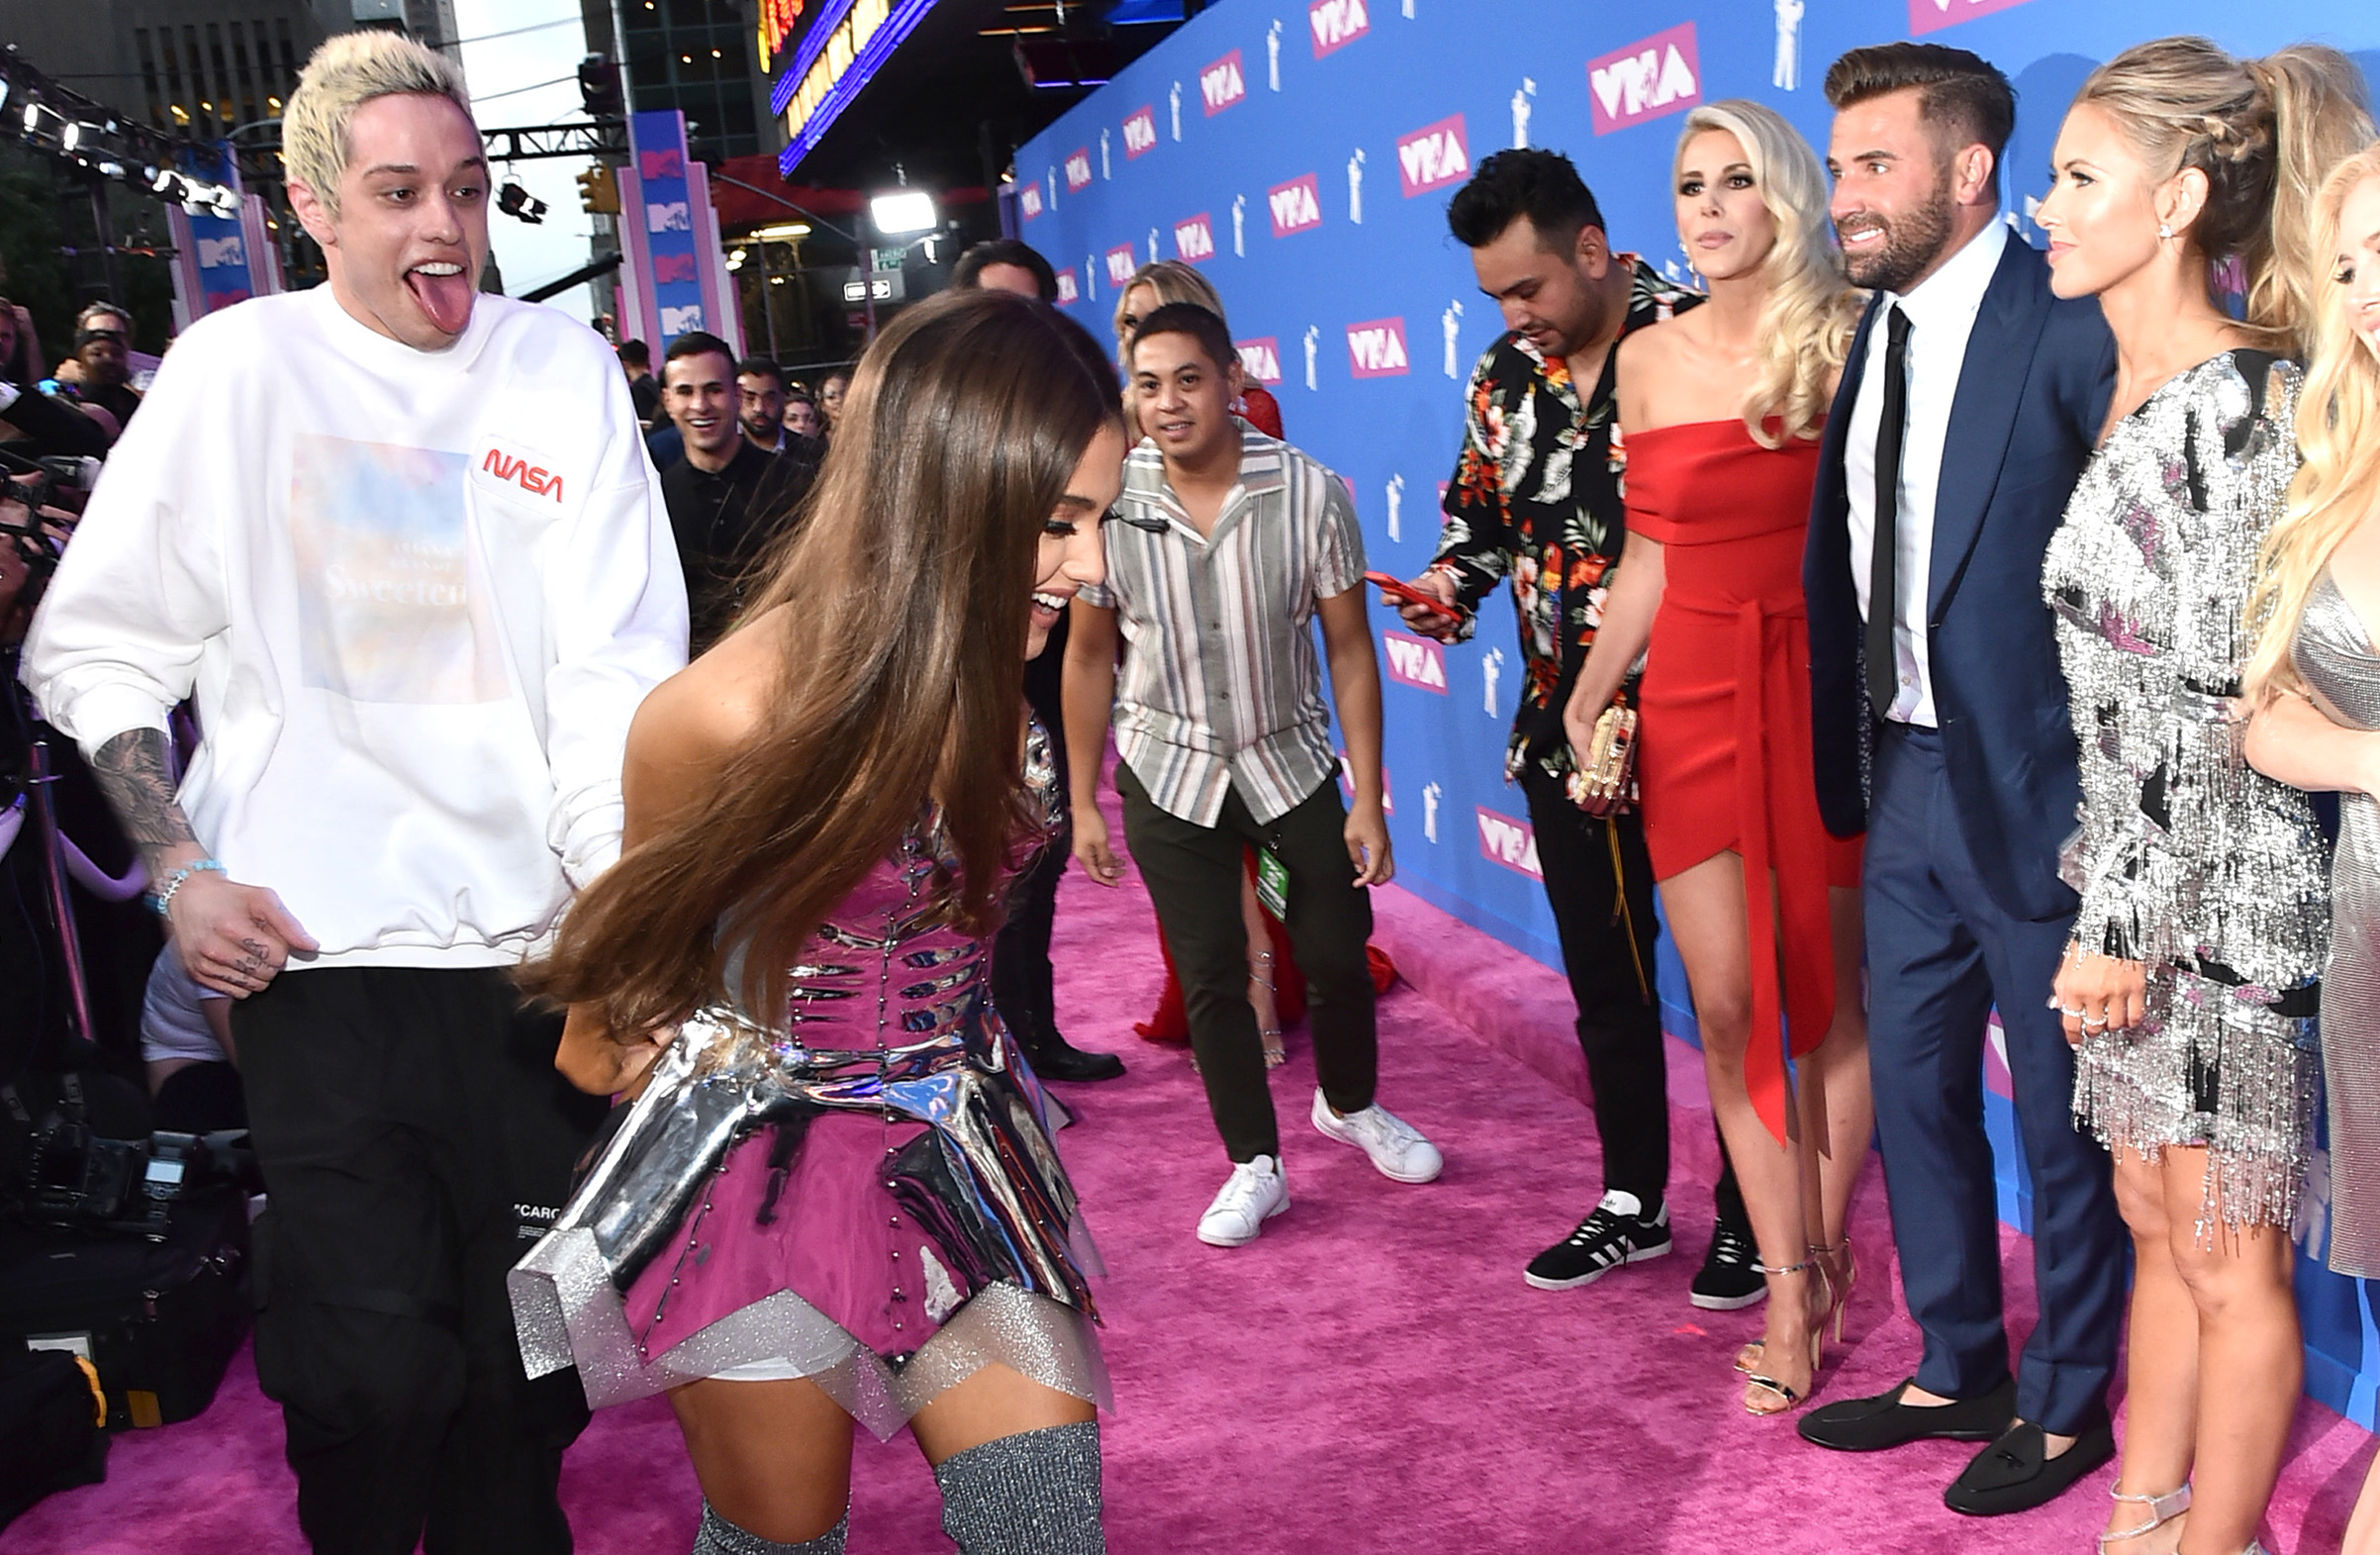 Pete Davidson and Ariana Grande attend the 2018 MTV Video Music Awards at Radio City Music Hall on in New York City on Aug. 20, 2018. (Mike Coppola—Getty Images for MTV)